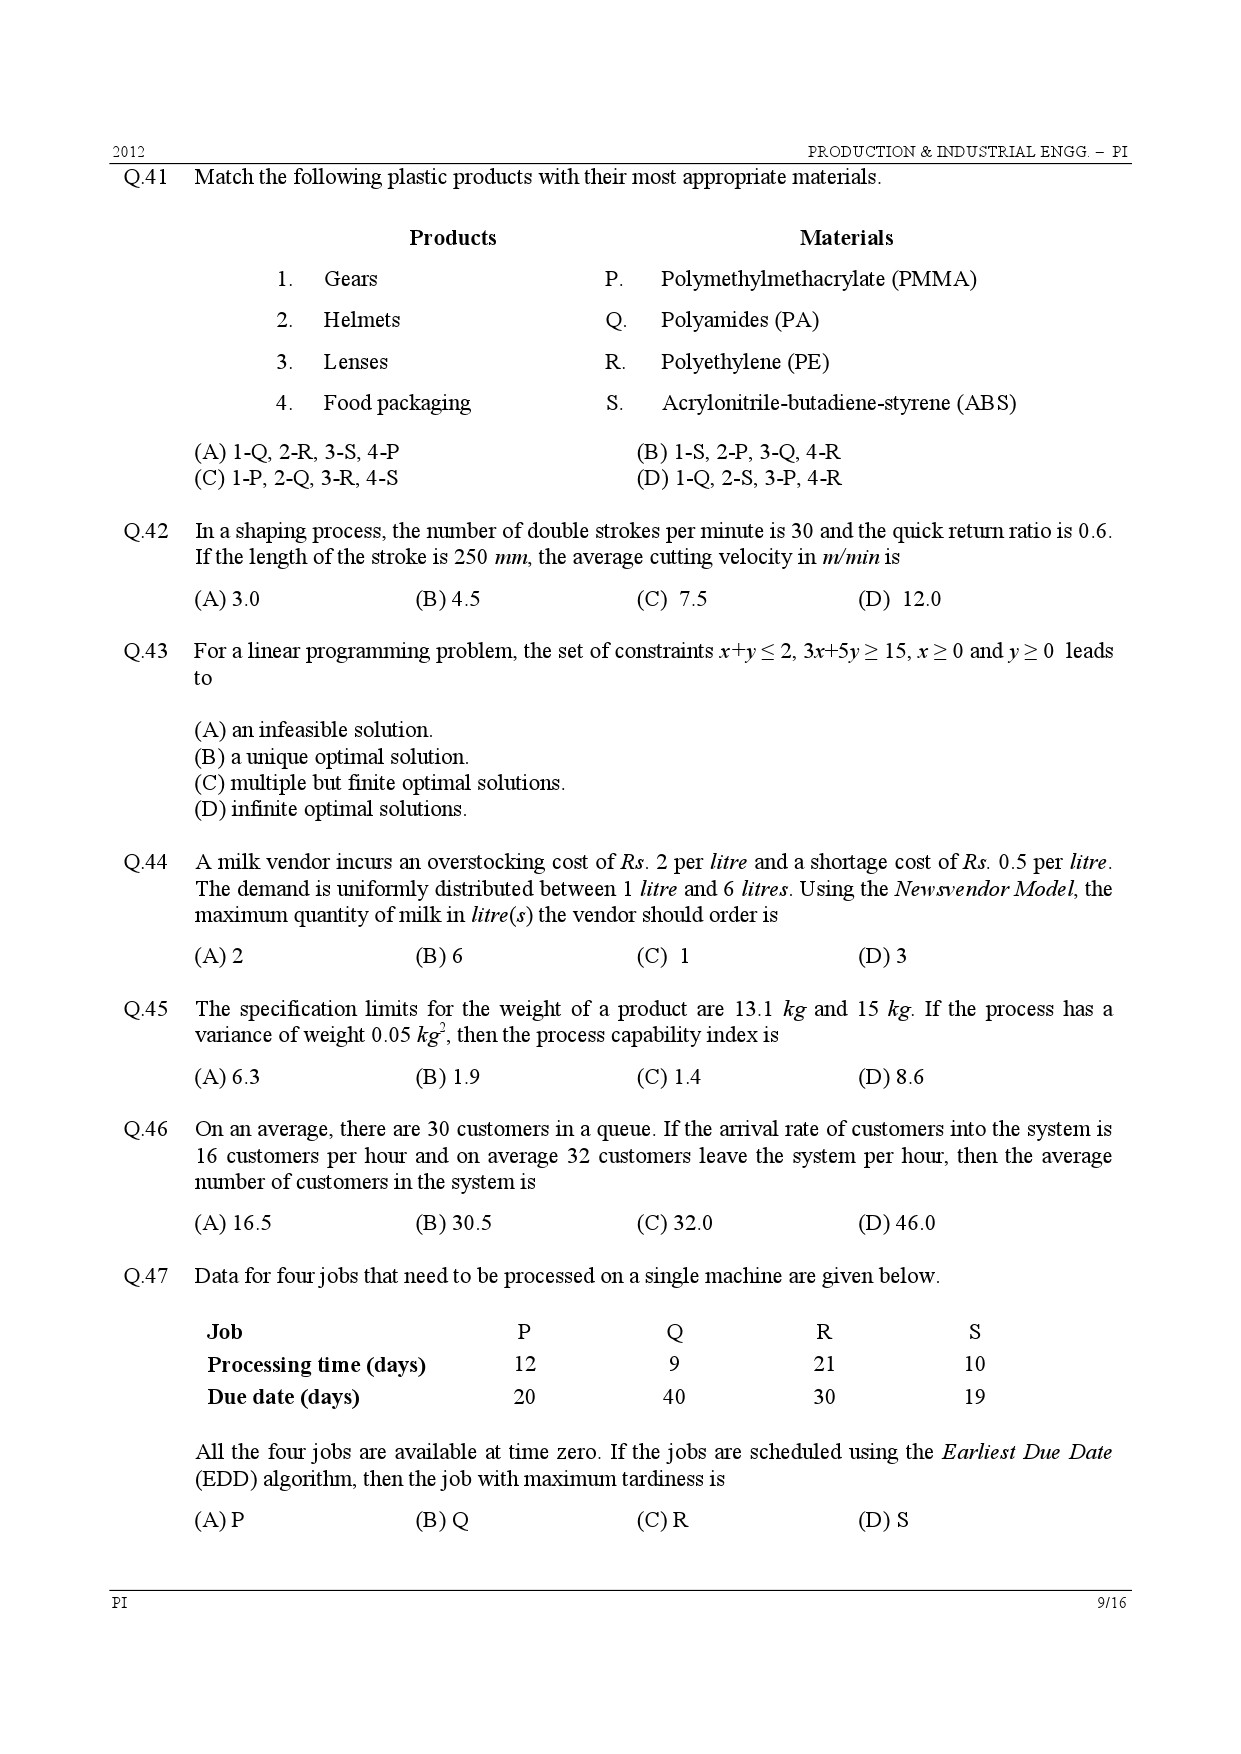 GATE Exam Question Paper 2012 Production and Industrial Engineering 9